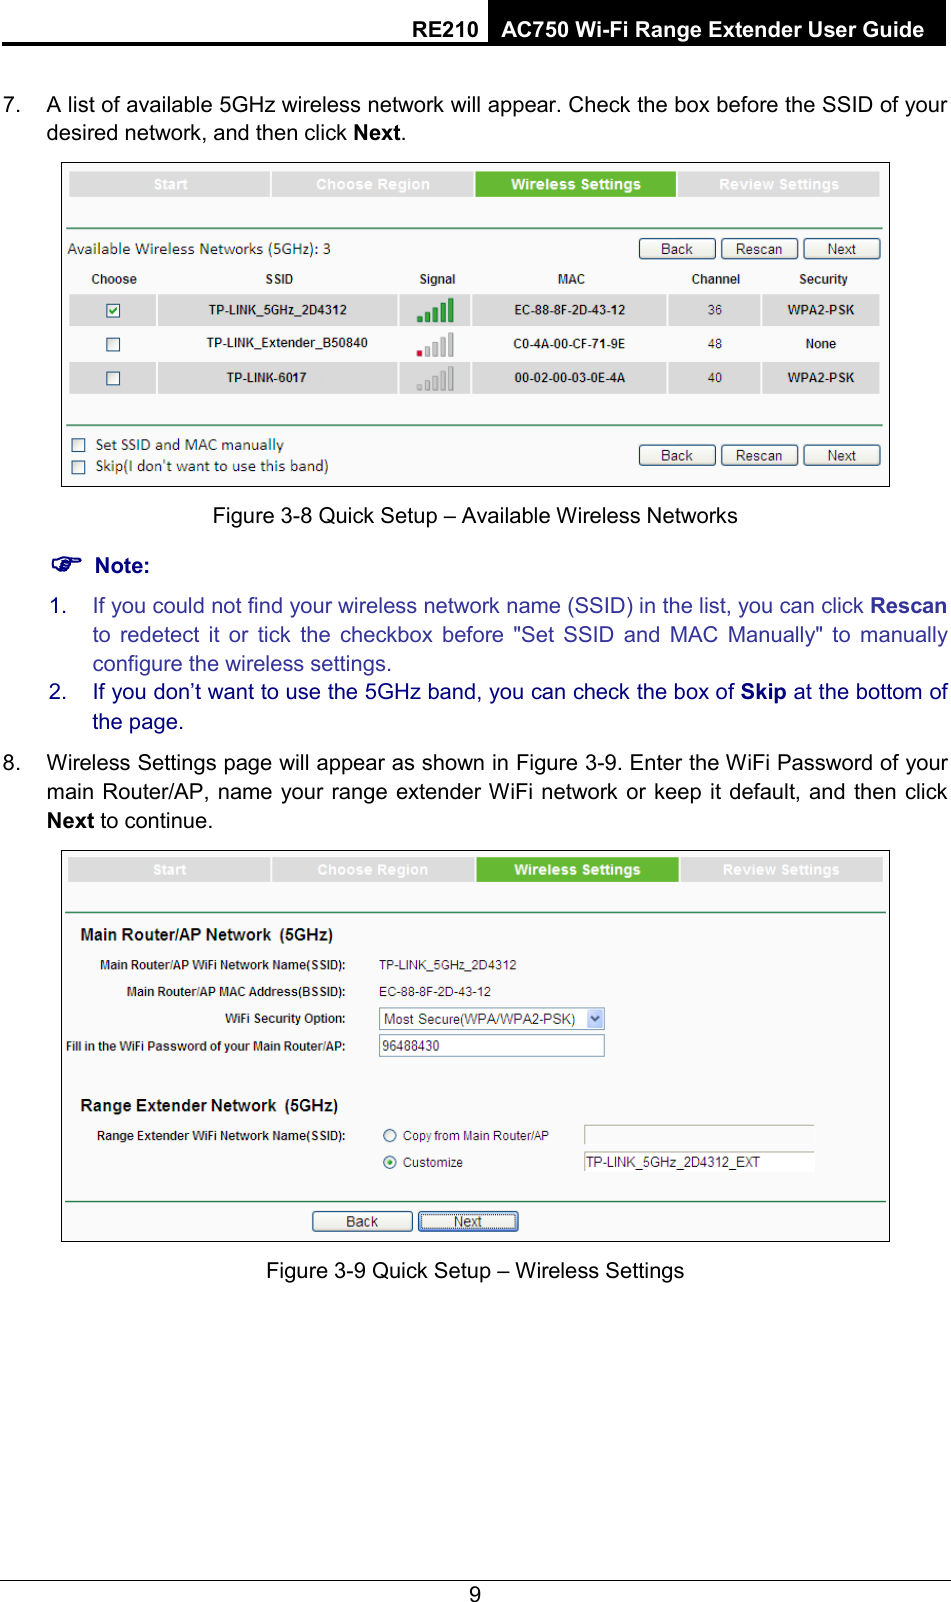 RE210 AC750 Wi-Fi Range Extender User Guide  7. A list of available 5GHz wireless network will appear. Check the box before the SSID of your desired network, and then click Next.    Figure 3-8 Quick Setup – Available Wireless Networks  Note: 1. If you could not find your wireless network name (SSID) in the list, you can click Rescan to redetect it or tick the checkbox before &quot;Set SSID and MAC Manually&quot; to manually configure the wireless settings. 2. If you don’t want to use the 5GHz band, you can check the box of Skip at the bottom of the page. 8. Wireless Settings page will appear as shown in Figure 3-9. Enter the WiFi Password of your main Router/AP, name your range extender WiFi network or keep it default, and then click Next to continue.  Figure 3-9 Quick Setup – Wireless Settings 9 